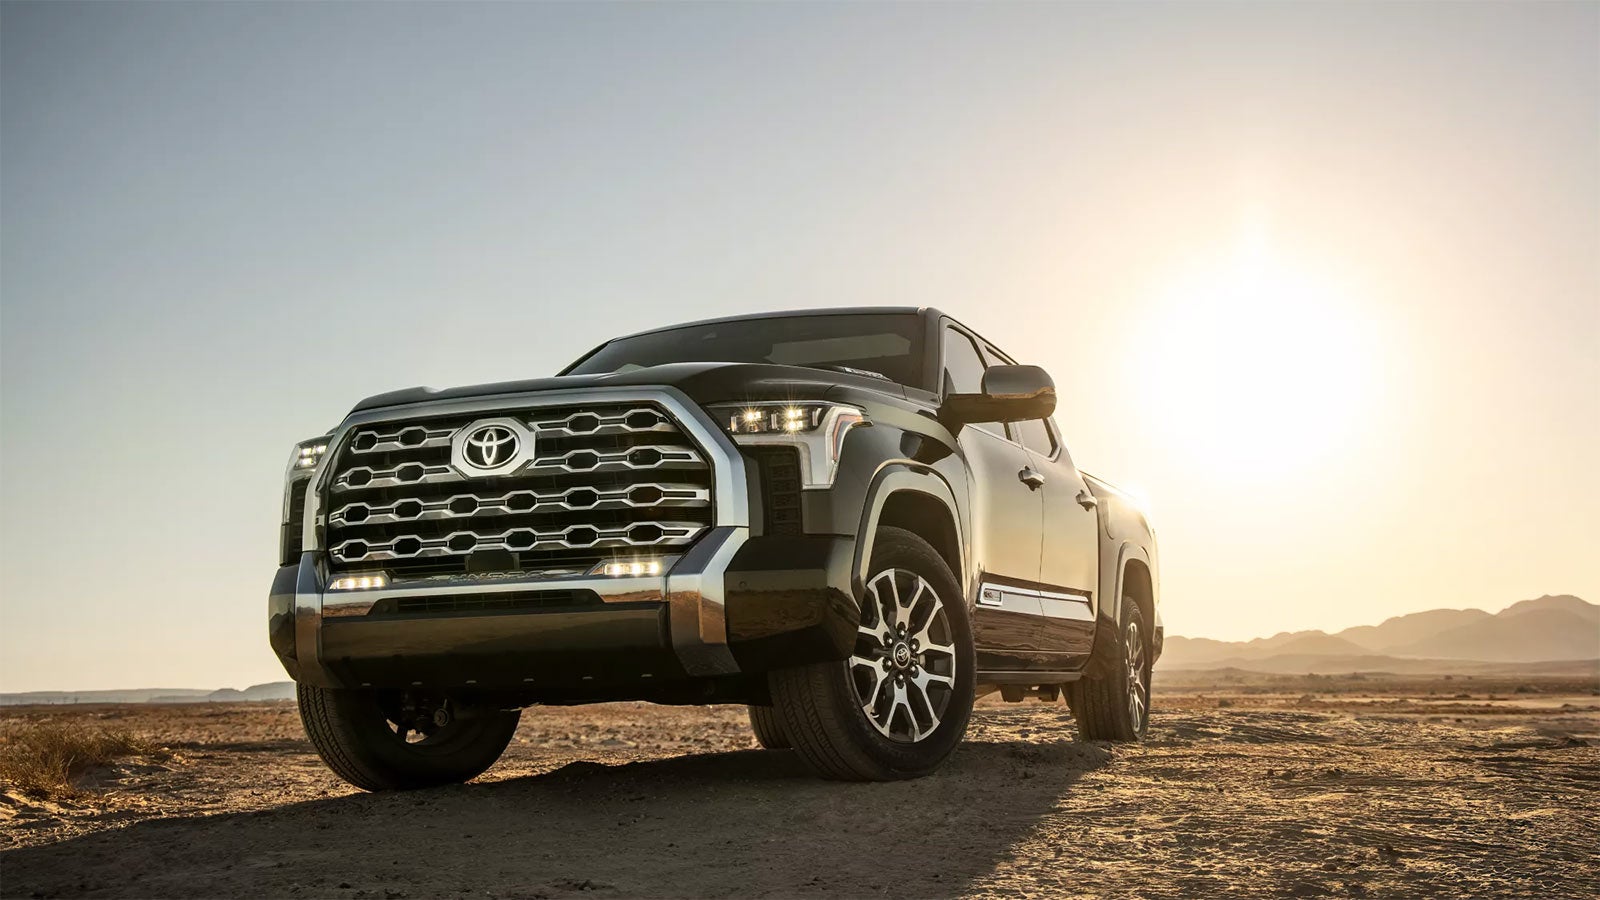 2022 Toyota Tundra Gallery | Ardmore Toyota in Ardmore PA